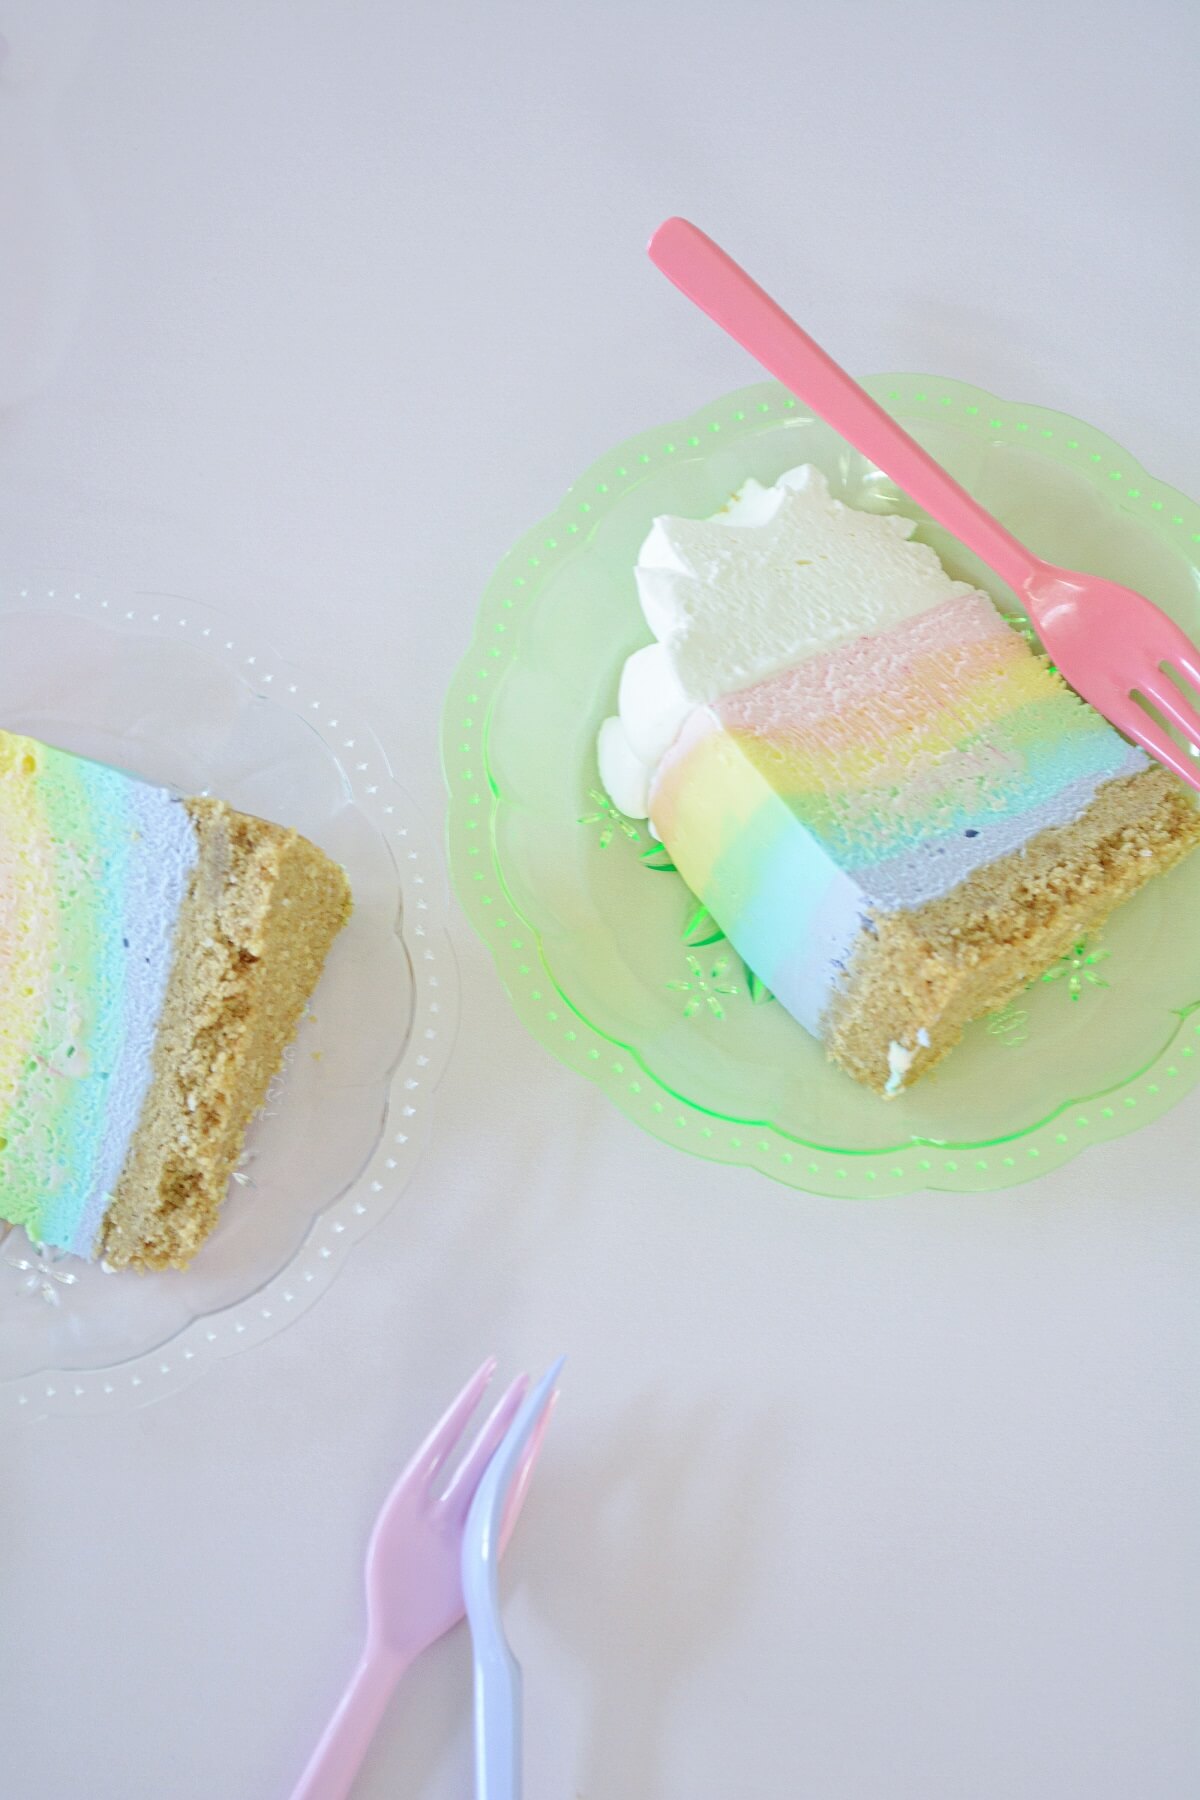 A slice of rainbow cheesecake on a green plate.